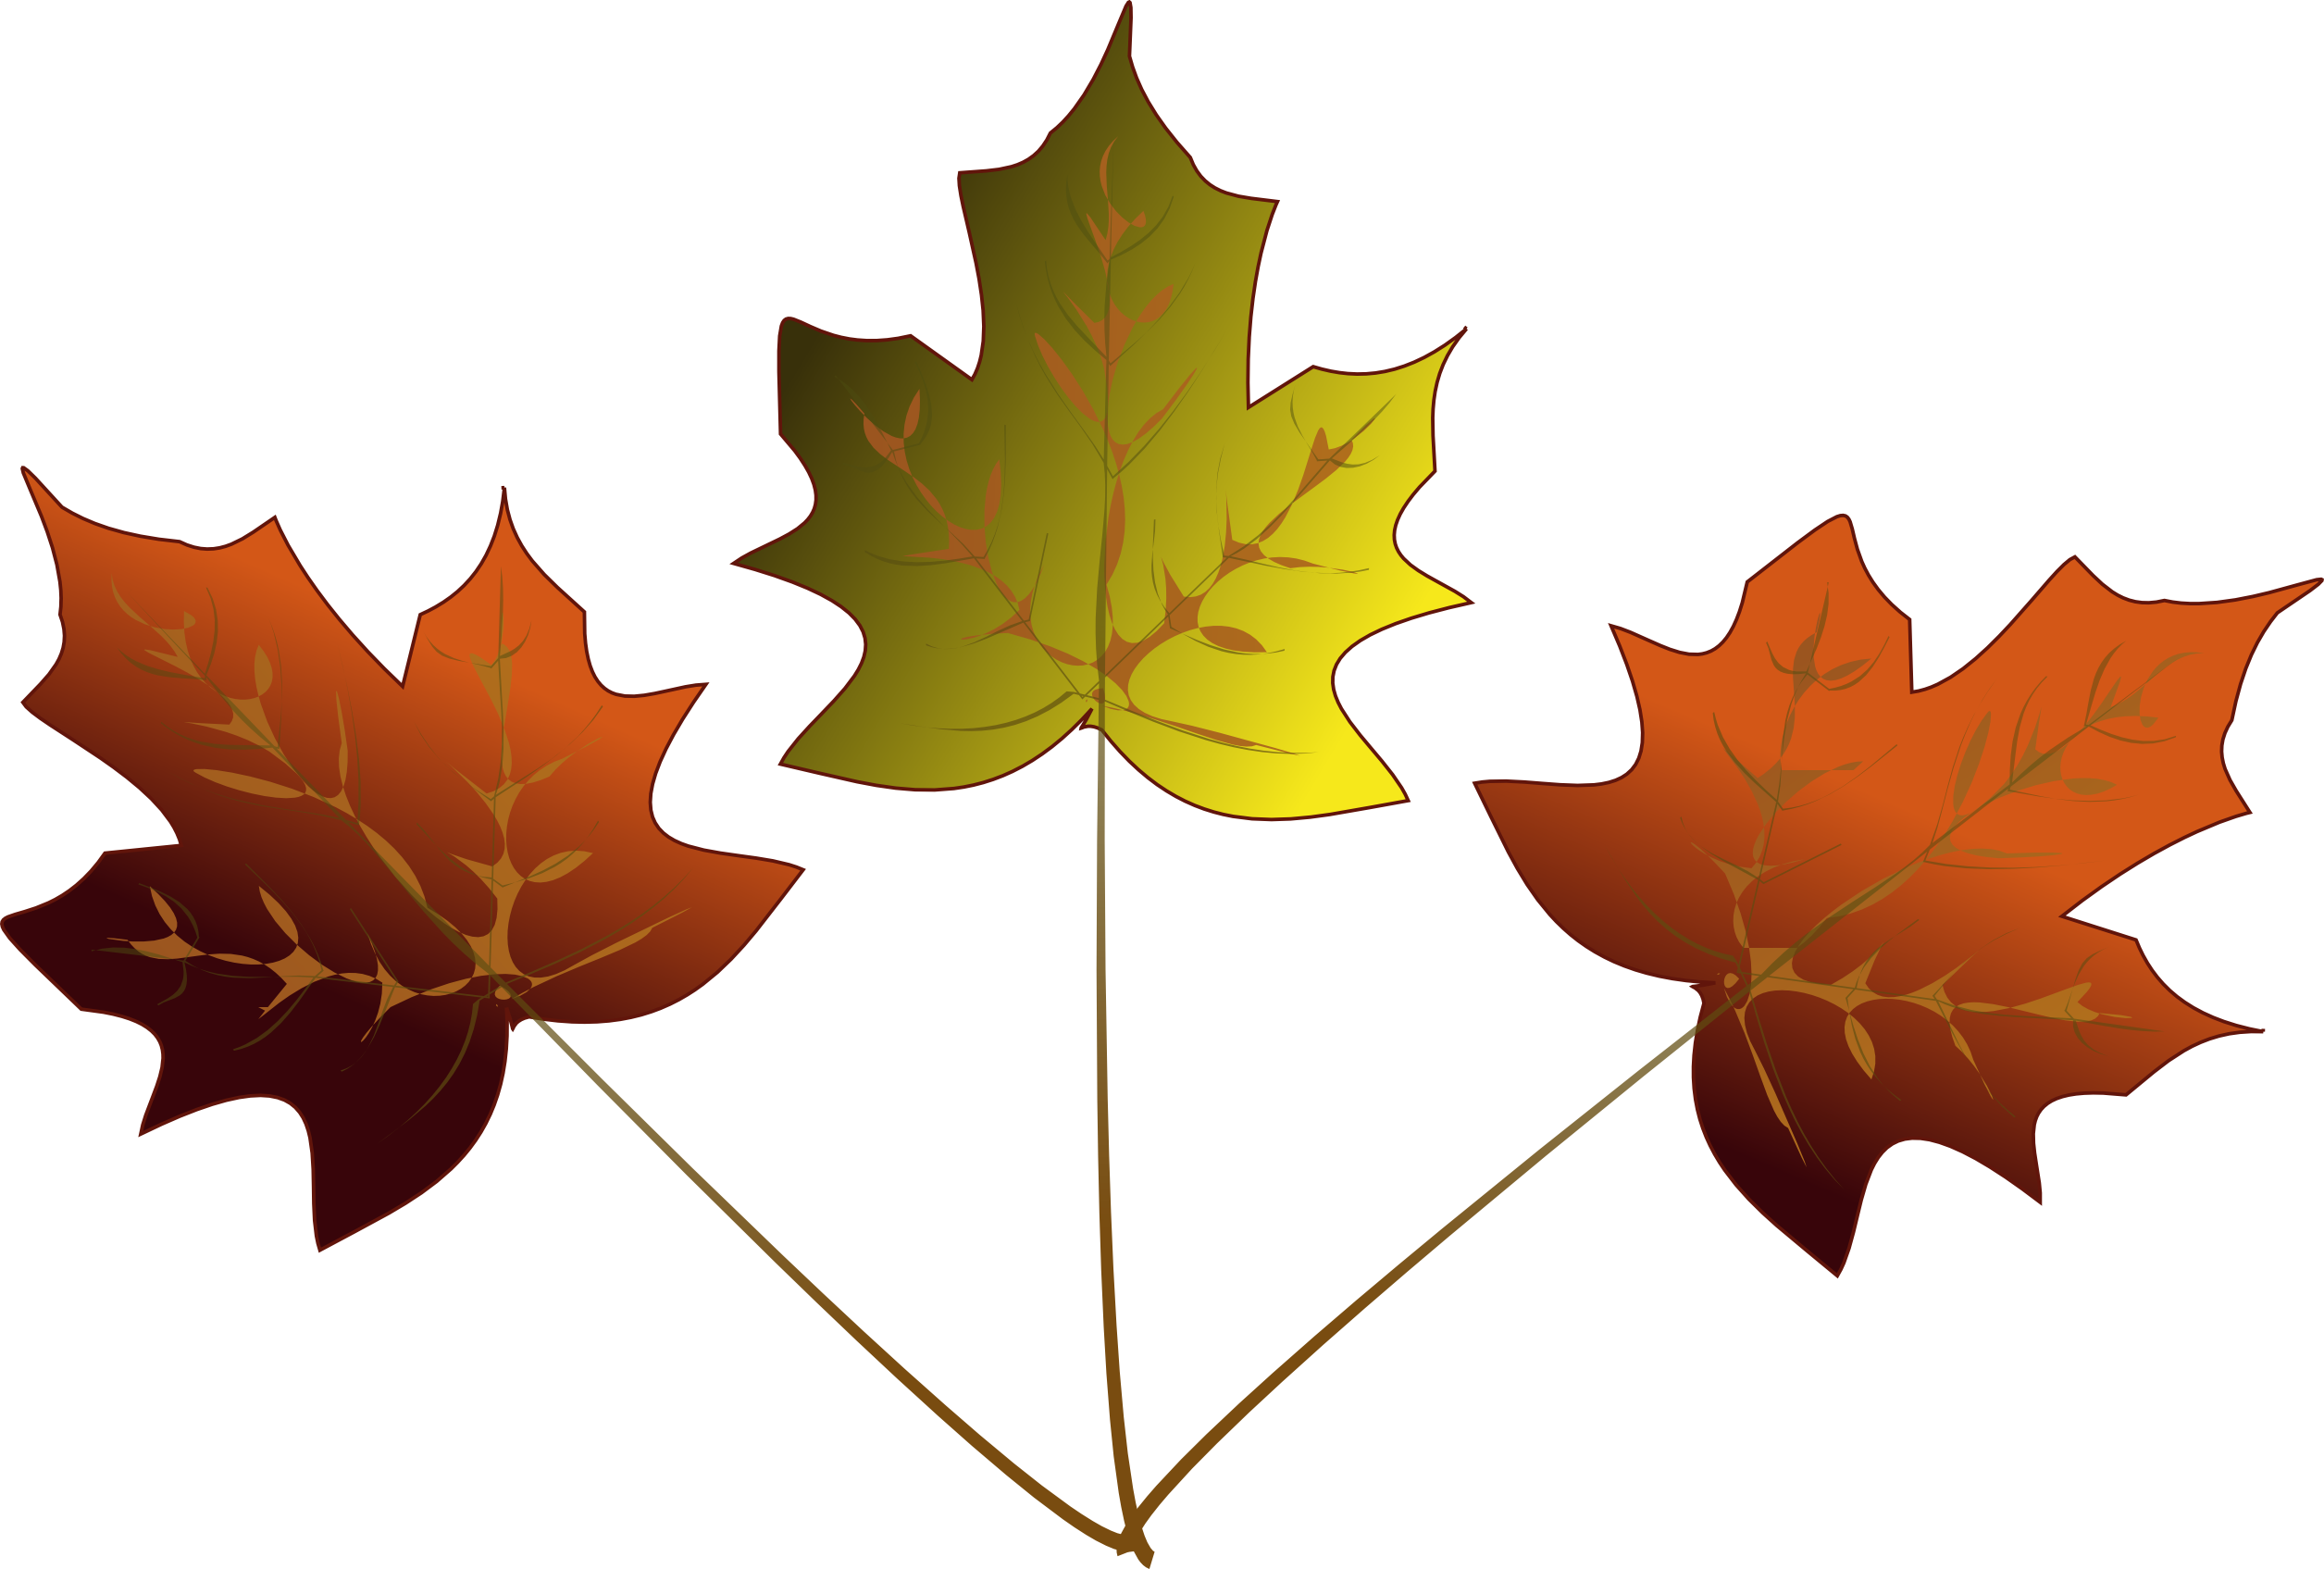 Maple Leaf Drawing - Clipart library